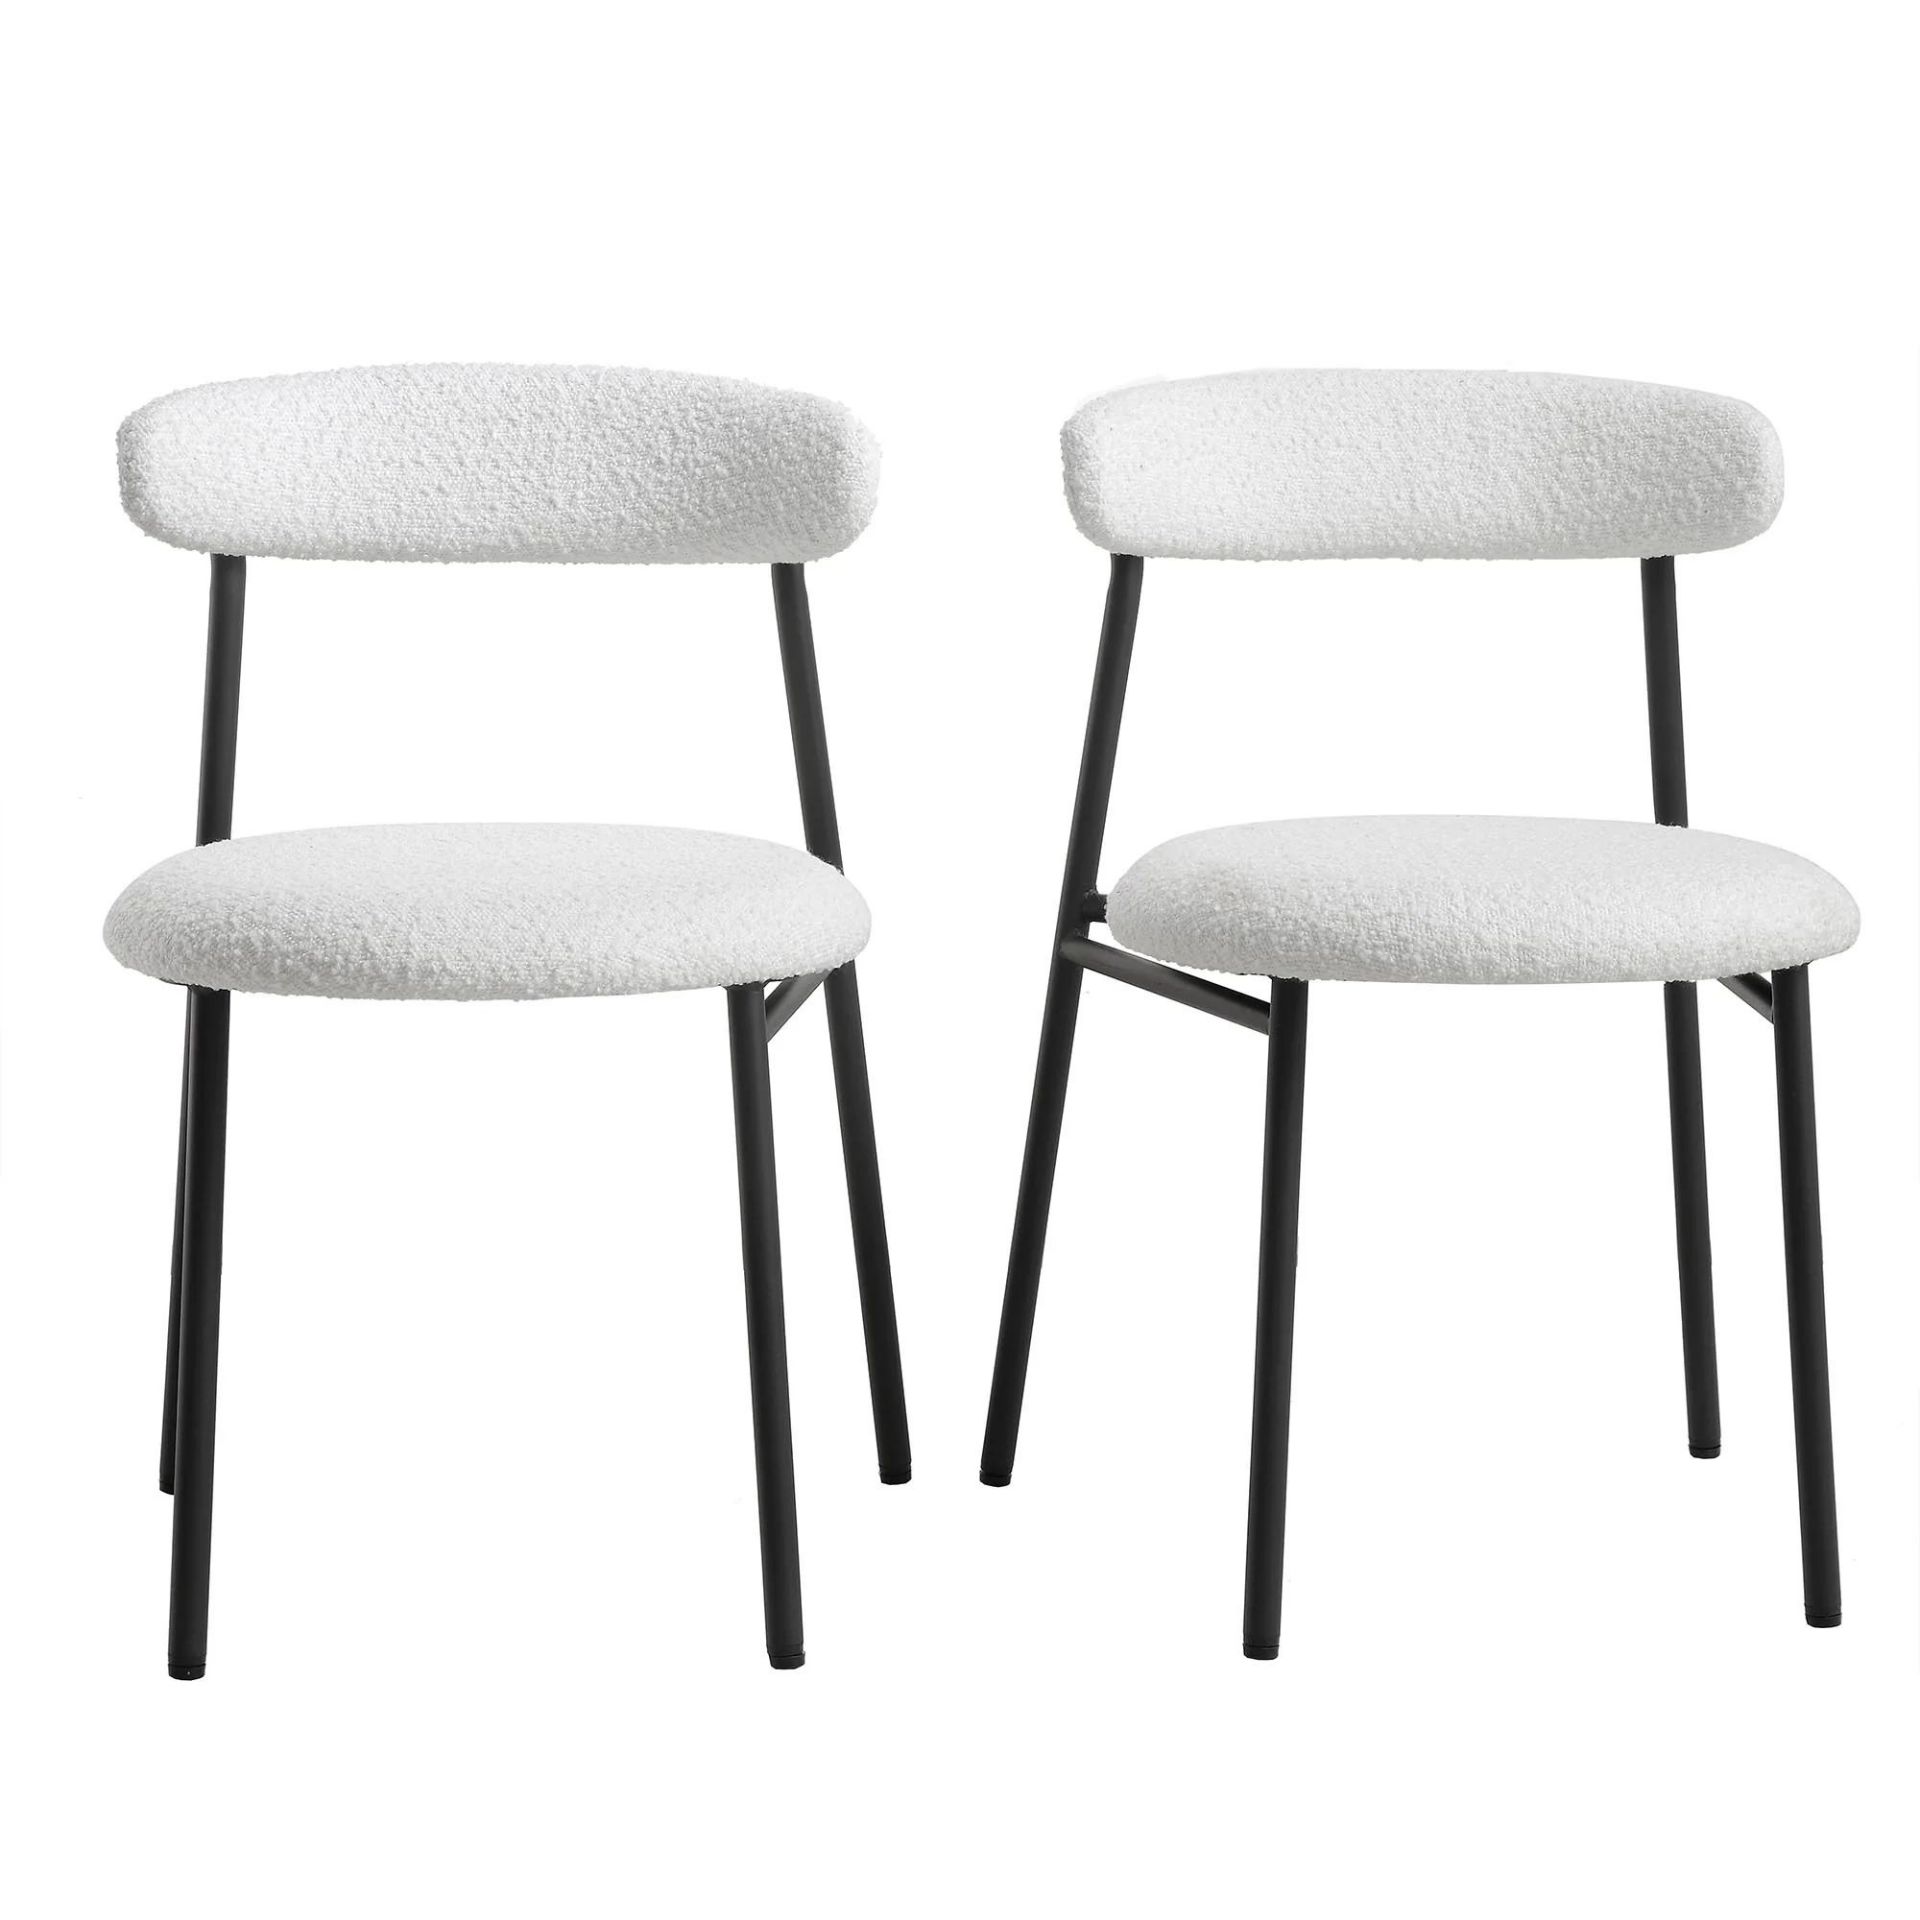 Donna Set of 2 White Boucle Dining Chairs. -ER30. RRP £199.99. With slightly curved back and round